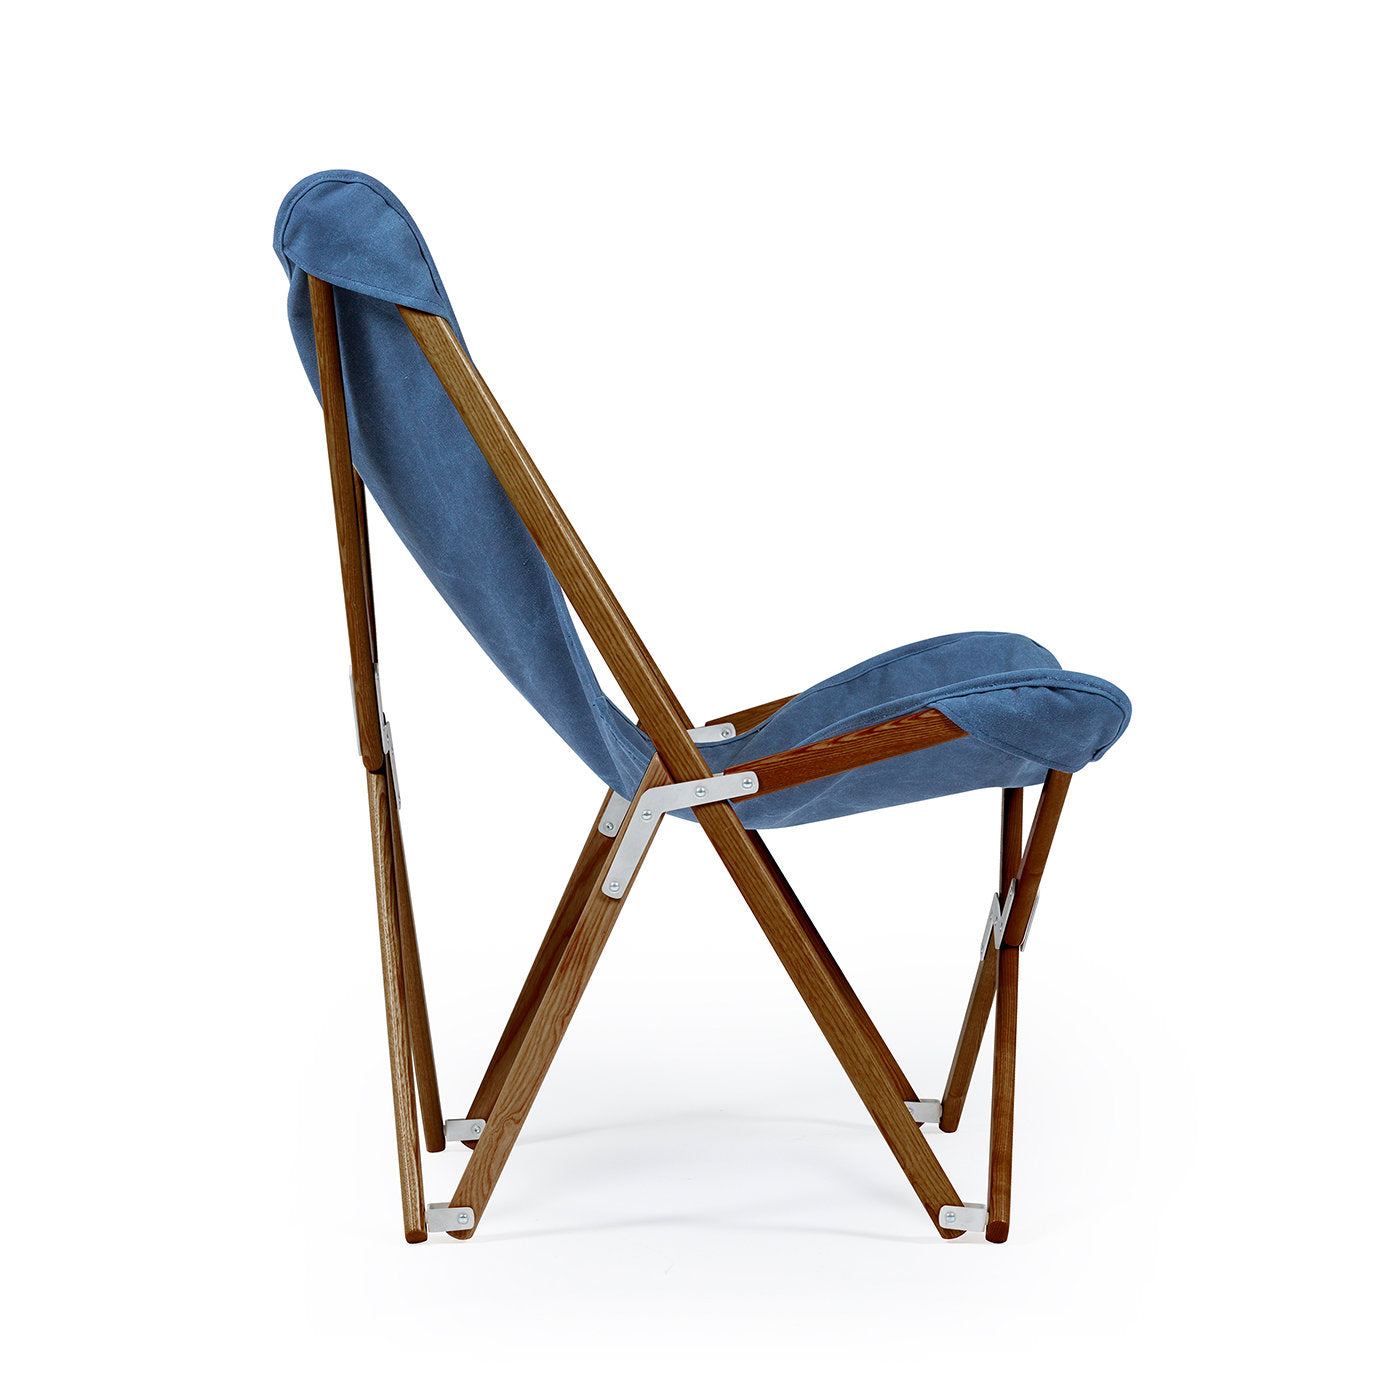 Tripolina Armchair in Blue Jeans - Alternative view 2